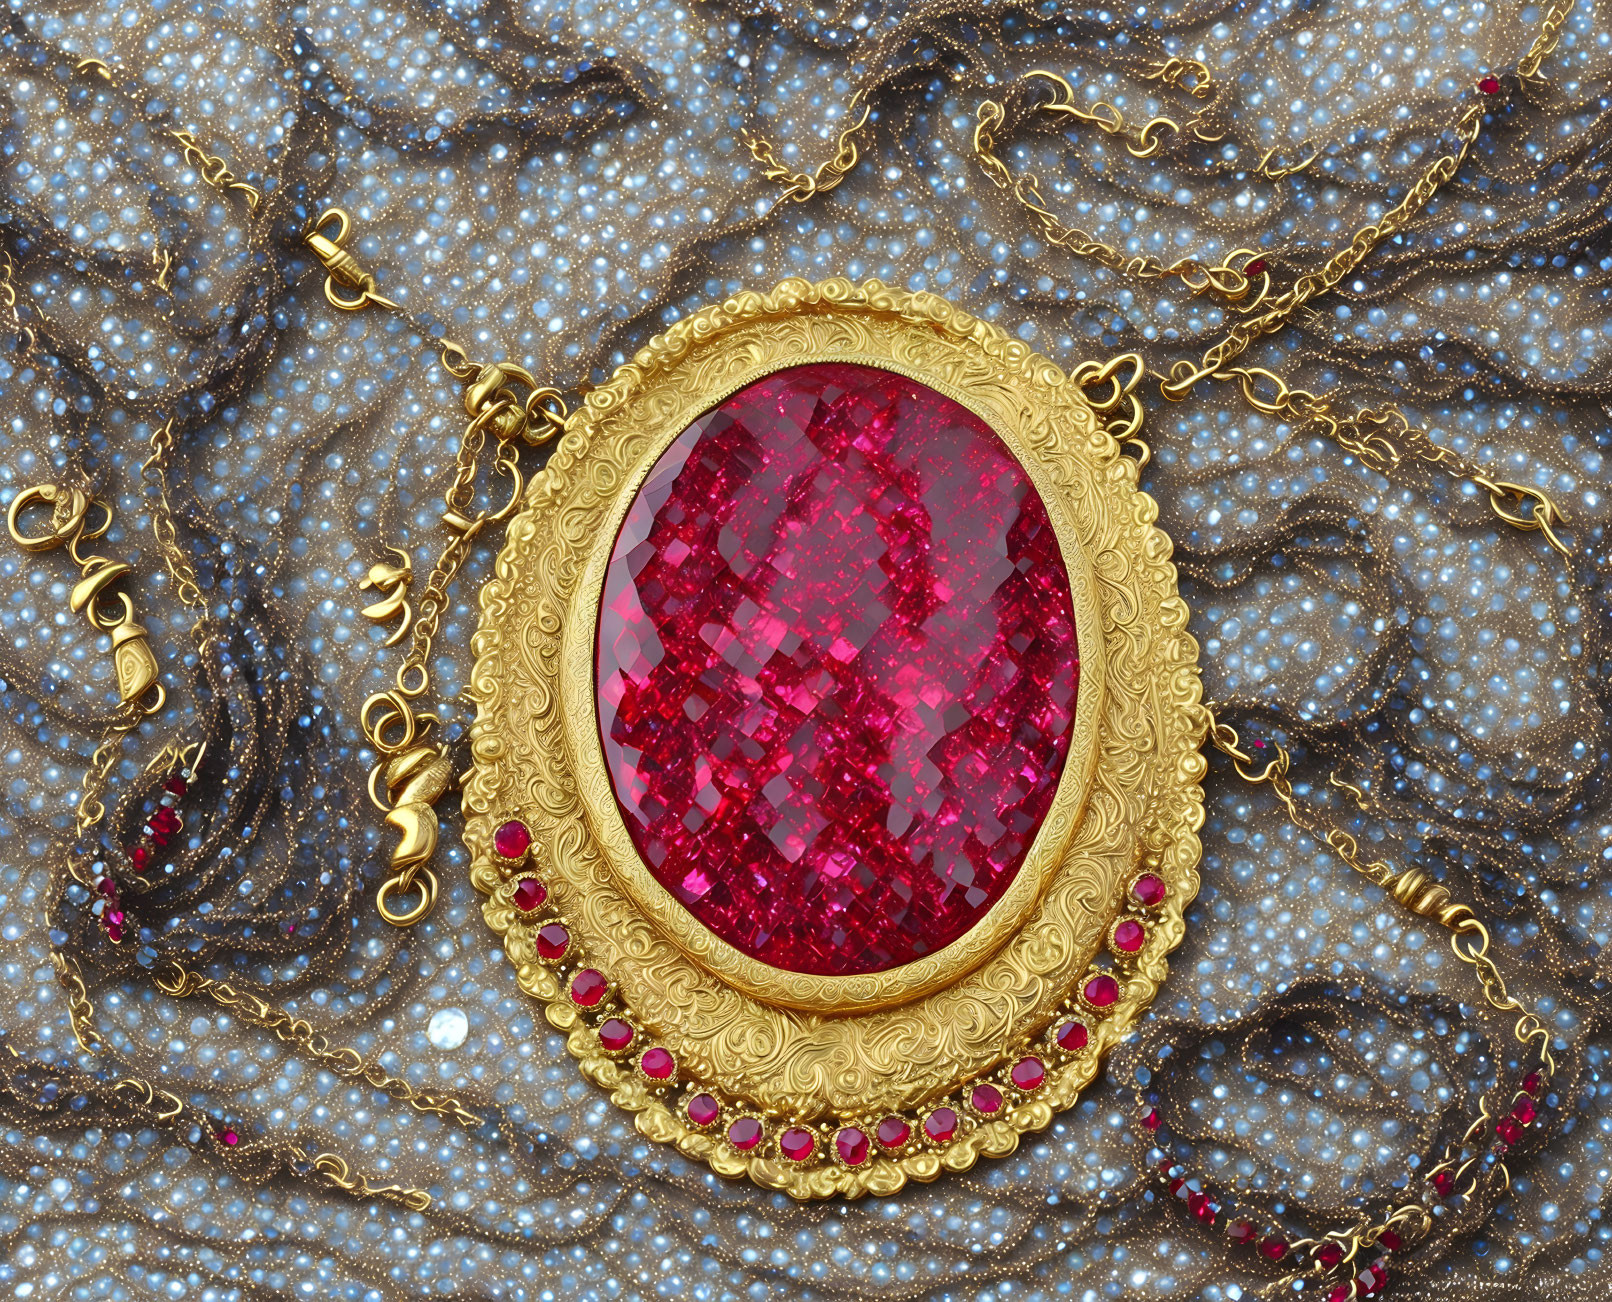 Golden Pendant with Red Gemstone on Blue Fabric with Glitter and Beads